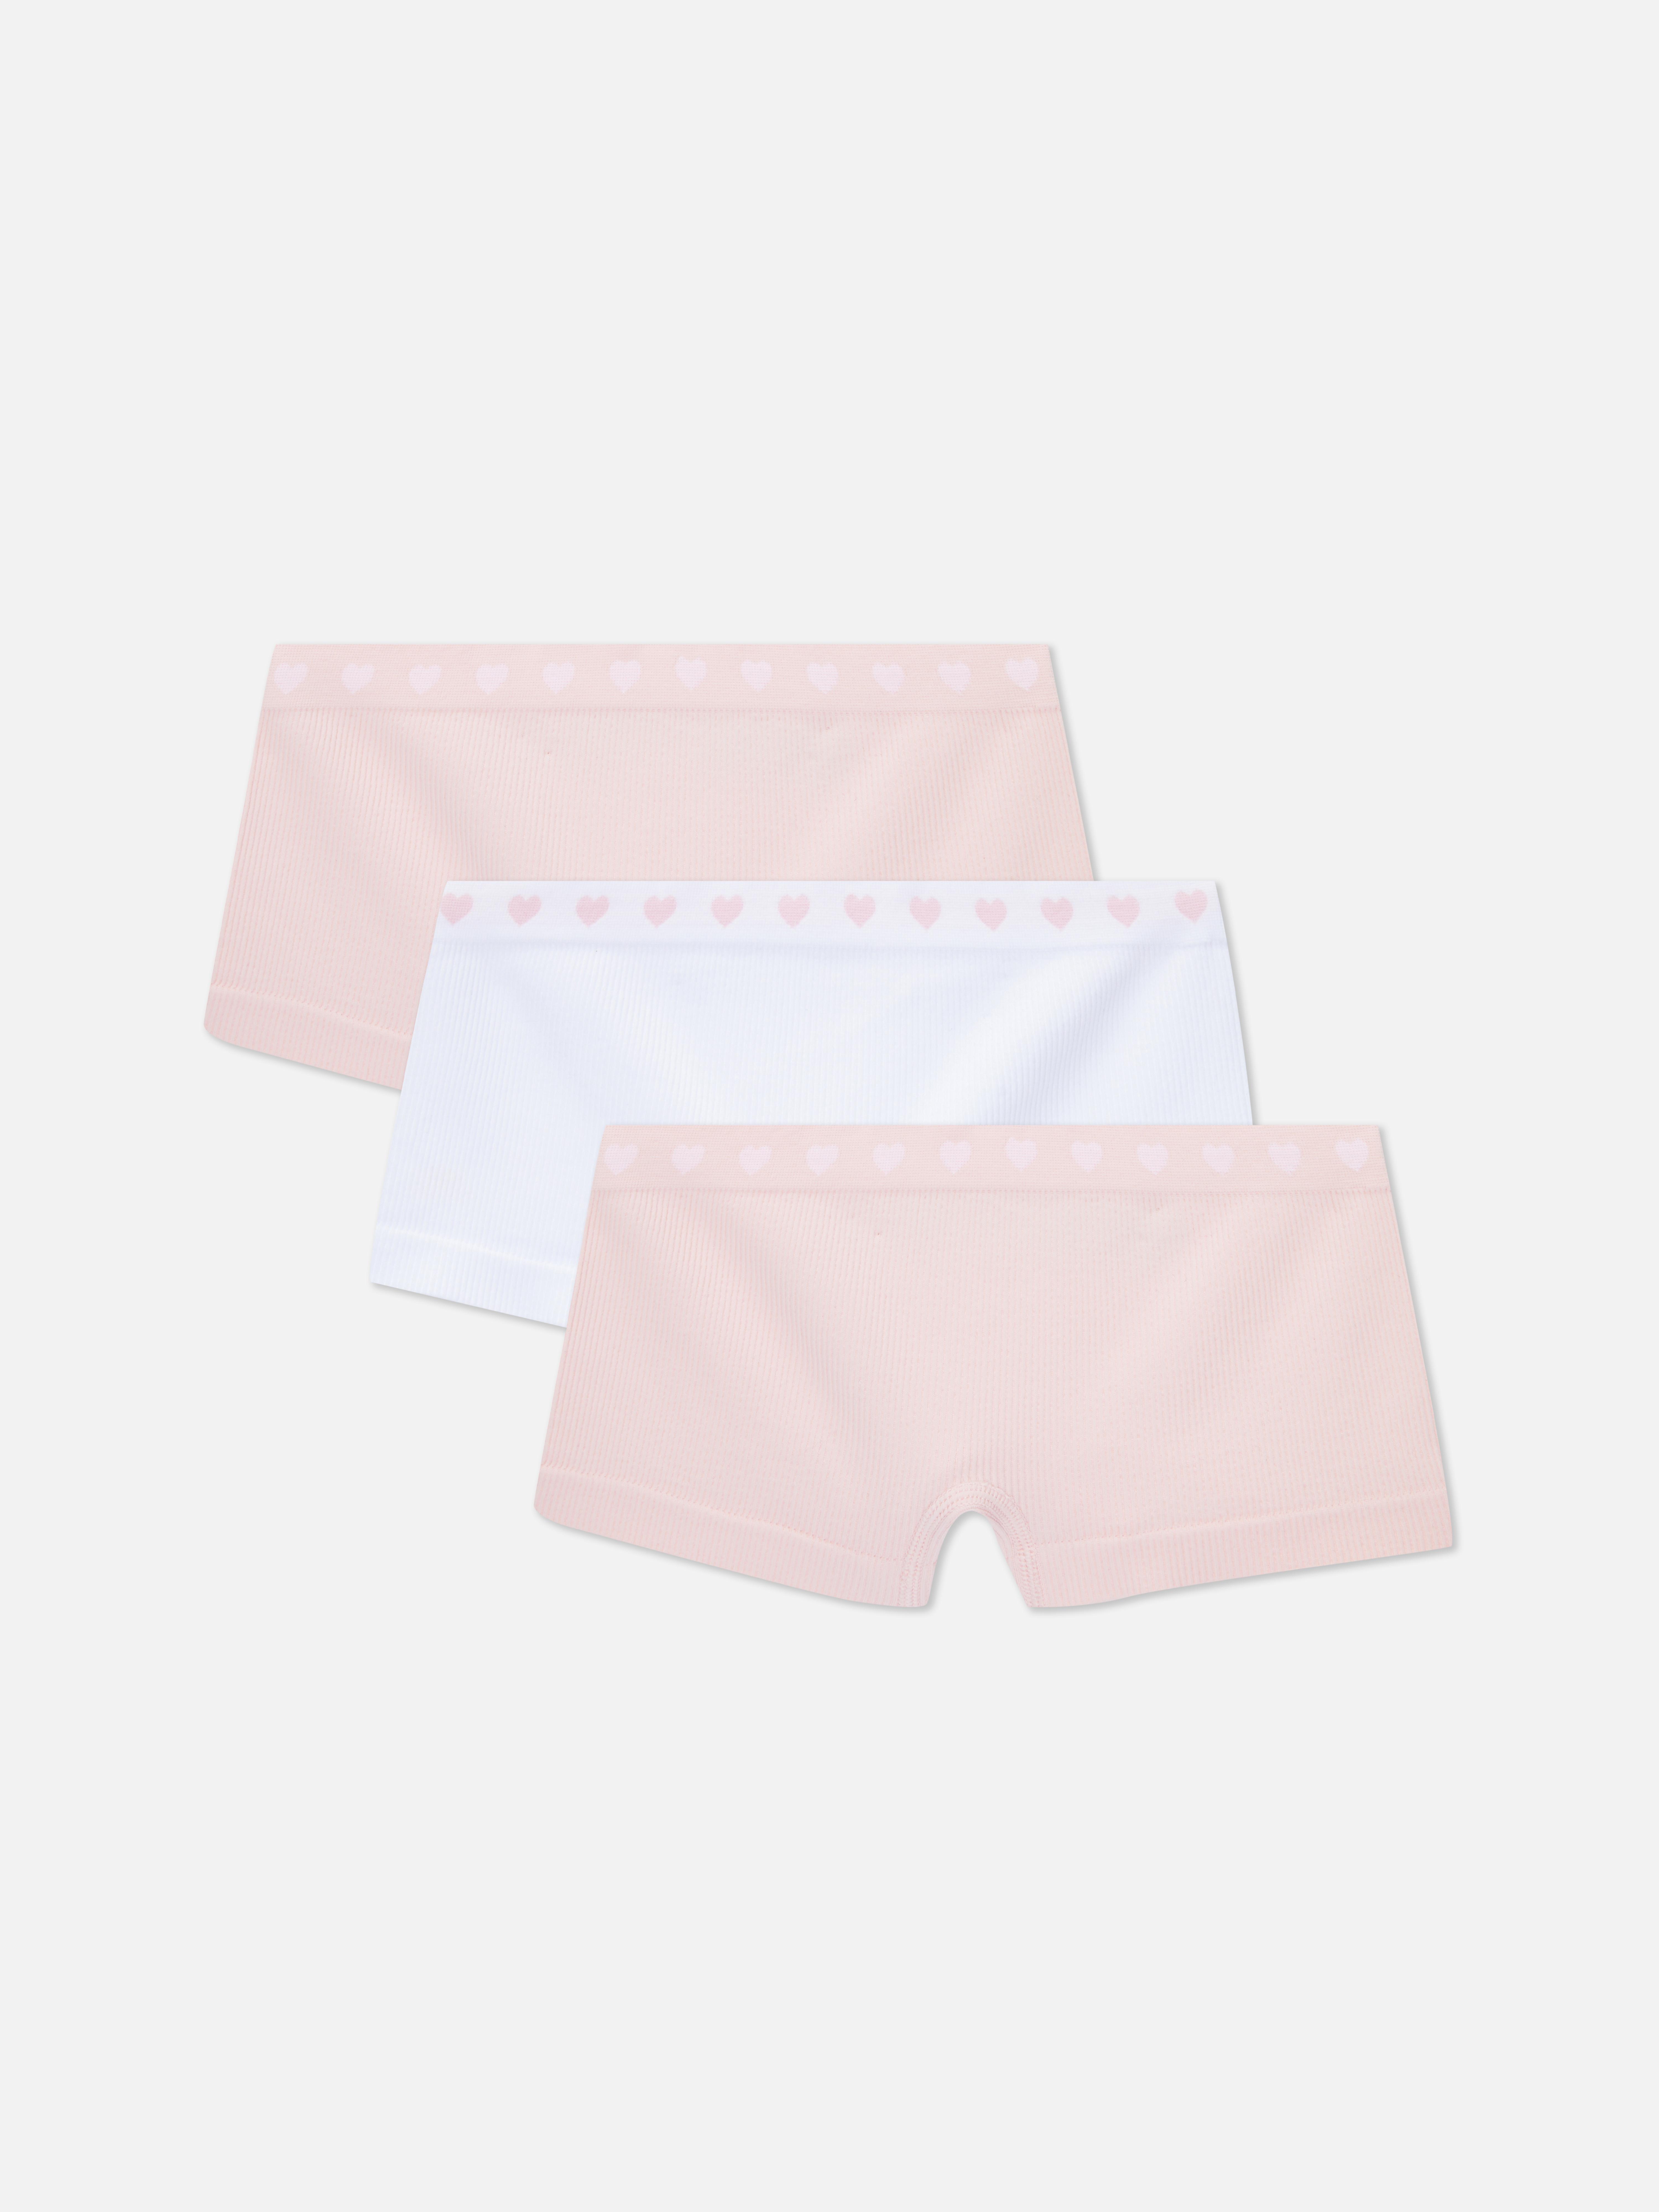 Pack 3 boxers s/ costuras